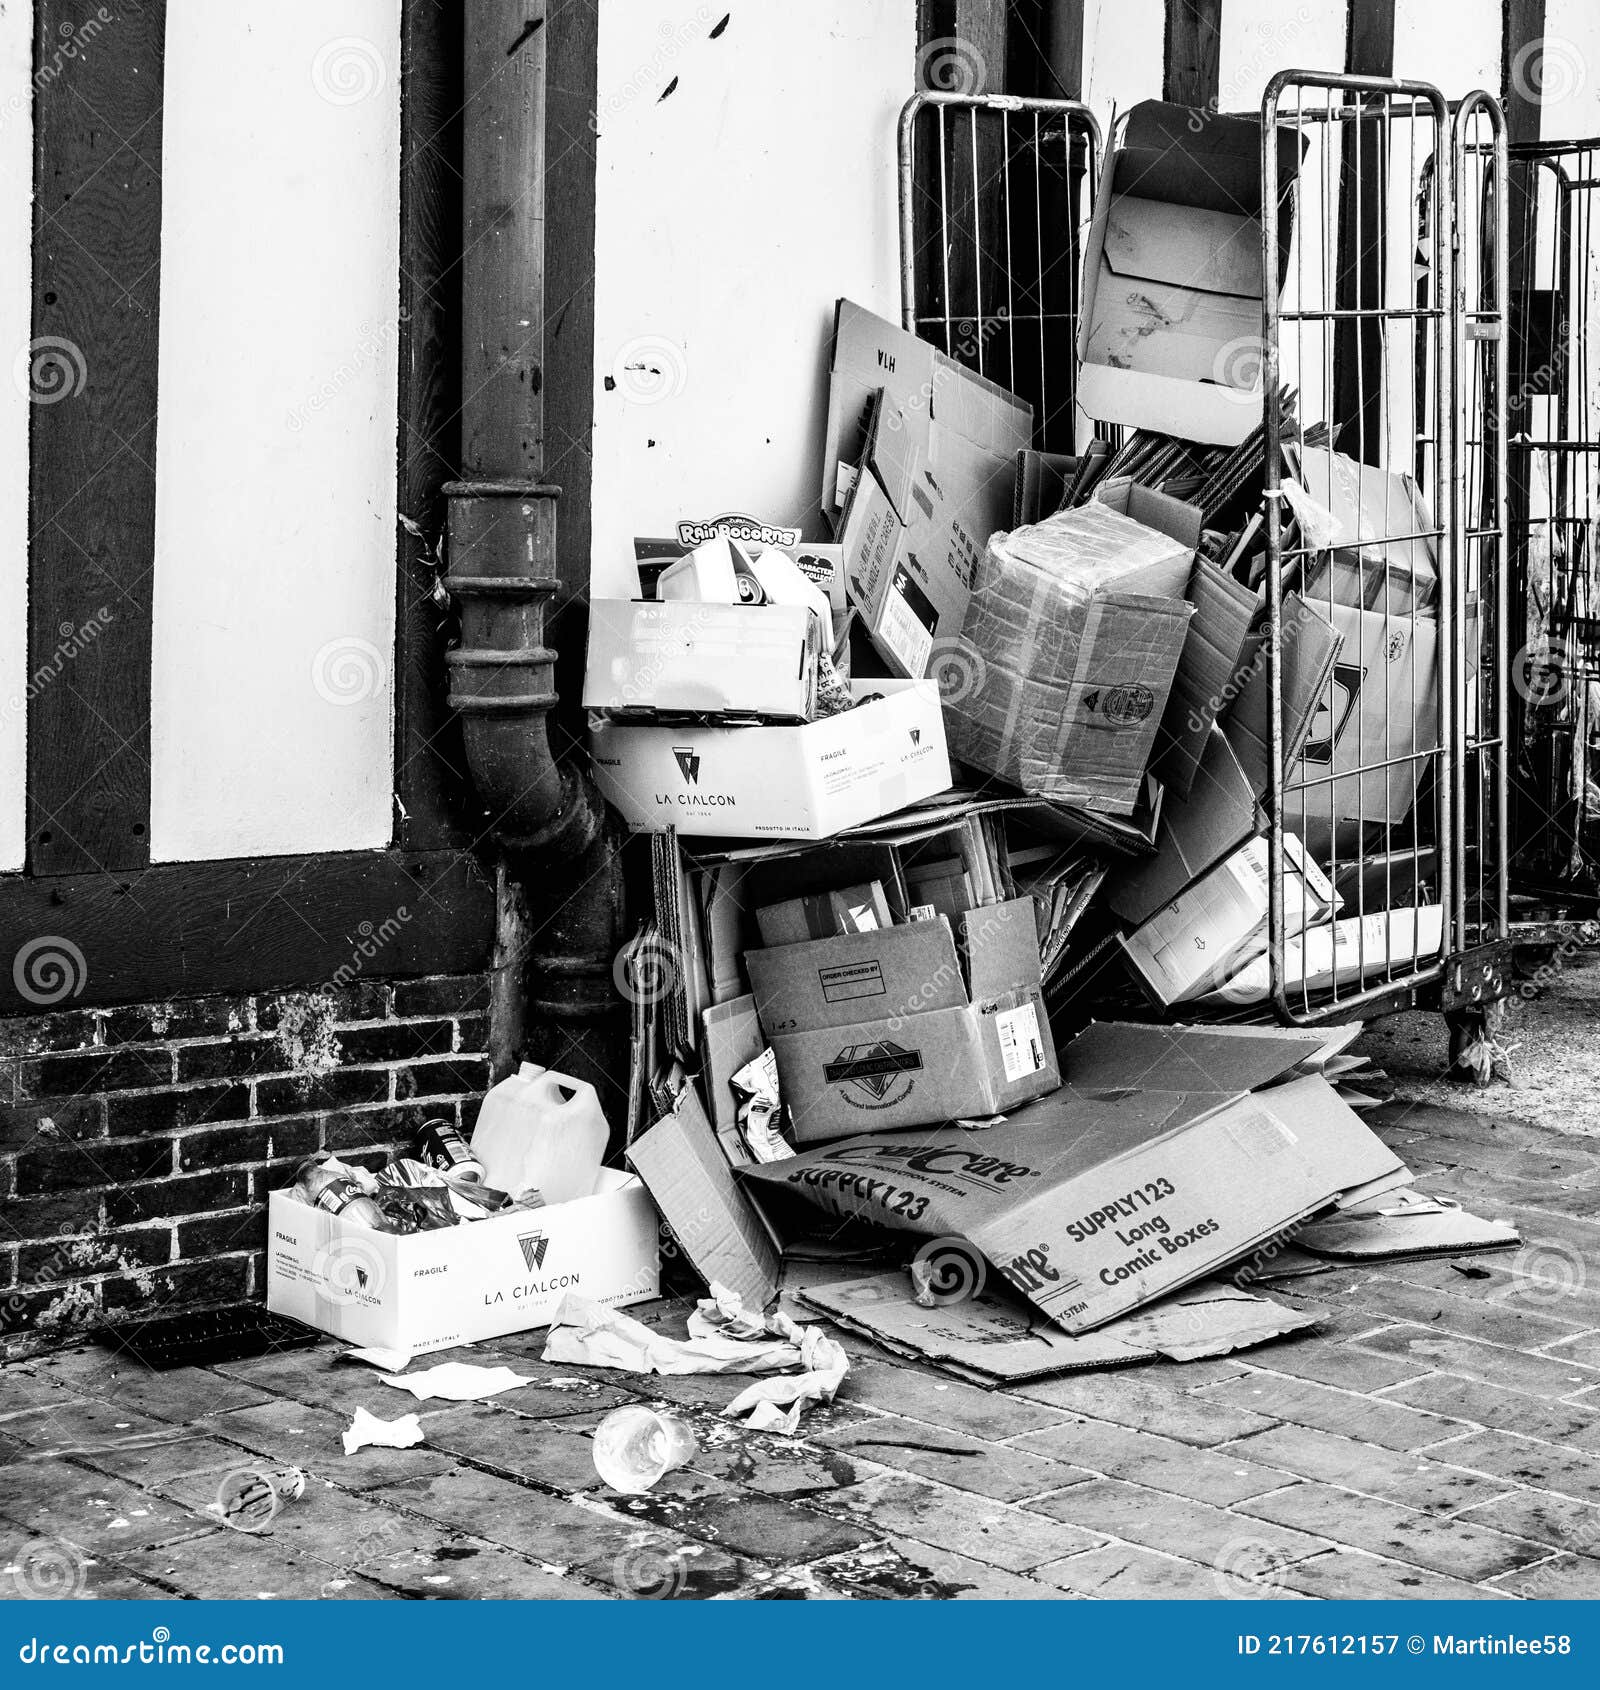 Pile or Stack of Waste Rubbish Cardboard Boxes Stacked Against a High  Street Wall with No People Editorial Photography - Image of coronavirus,  atmosphere: 217612157